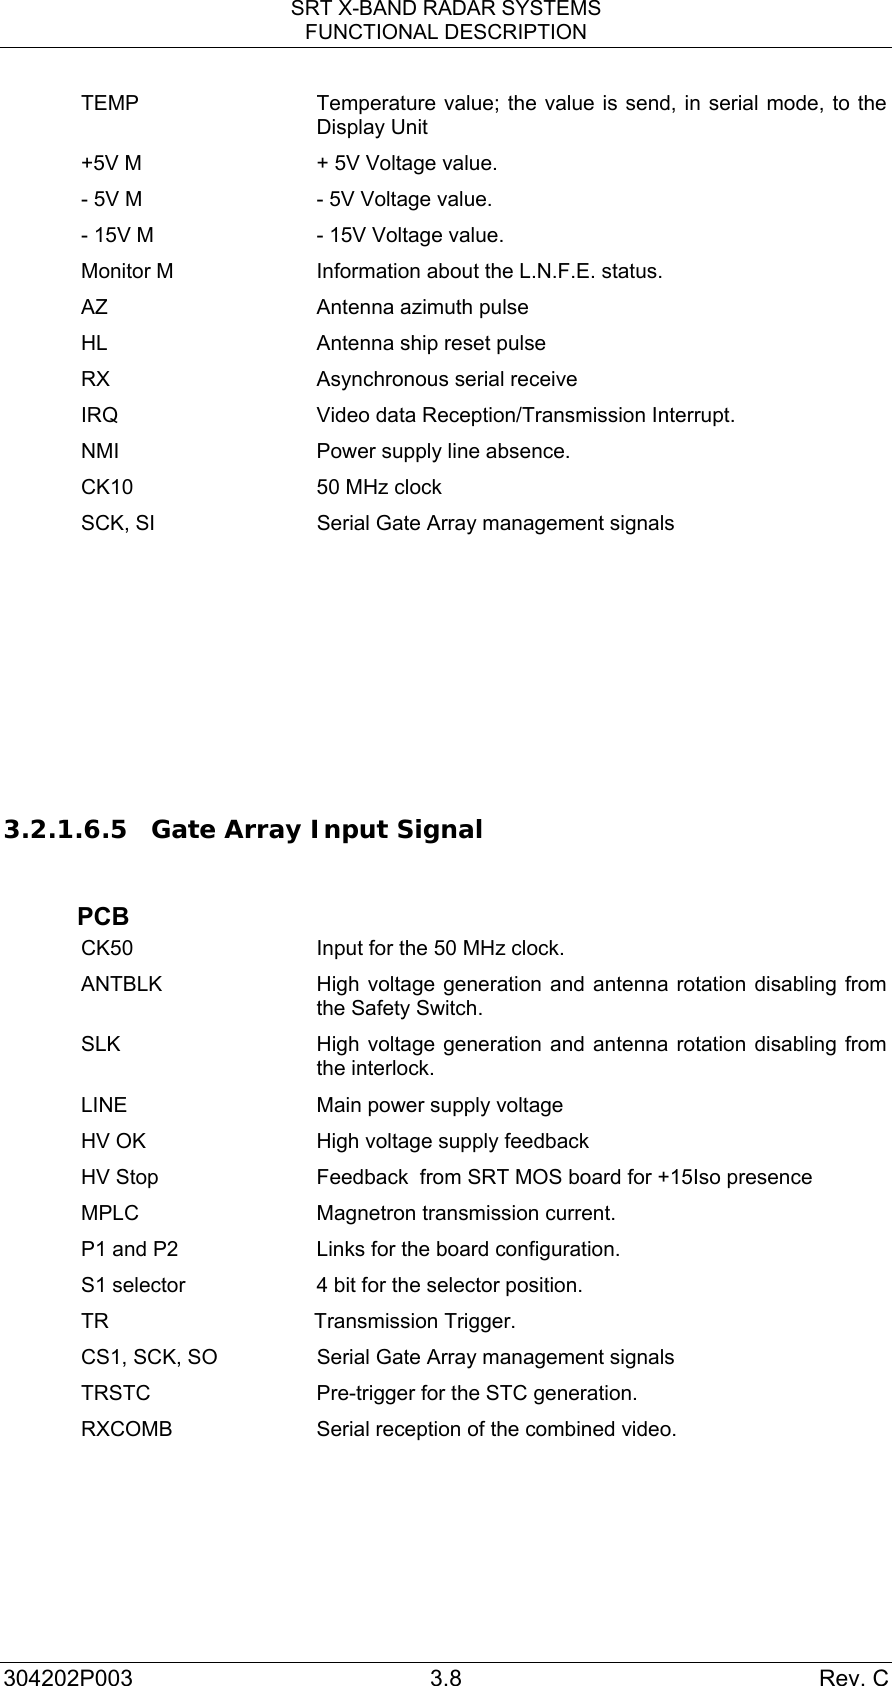 SRT X-BAND RADAR SYSTEMS FUNCTIONAL DESCRIPTION 304202P003 3.8  Rev. C TEMP  Temperature value; the value is send, in serial mode, to the Display Unit +5V M  + 5V Voltage value. - 5V M  - 5V Voltage value. - 15V M  - 15V Voltage value. Monitor M  Information about the L.N.F.E. status. AZ  Antenna azimuth pulse HL  Antenna ship reset pulse RX  Asynchronous serial receive  IRQ  Video data Reception/Transmission Interrupt. NMI  Power supply line absence. CK10  50 MHz clock SCK, SI  Serial Gate Array management signals       3.2.1.6.5 Gate Array Input Signal   PCB CK50  Input for the 50 MHz clock. ANTBLK  High voltage generation and antenna rotation disabling from the Safety Switch. SLK  High voltage generation and antenna rotation disabling from the interlock. LINE  Main power supply voltage  HV OK  High voltage supply feedback   HV Stop  Feedback  from SRT MOS board for +15Iso presence MPLC  Magnetron transmission current. P1 and P2   Links for the board configuration. S1 selector  4 bit for the selector position. TR Transmission Trigger. CS1, SCK, SO  Serial Gate Array management signals TRSTC  Pre-trigger for the STC generation. RXCOMB  Serial reception of the combined video.    